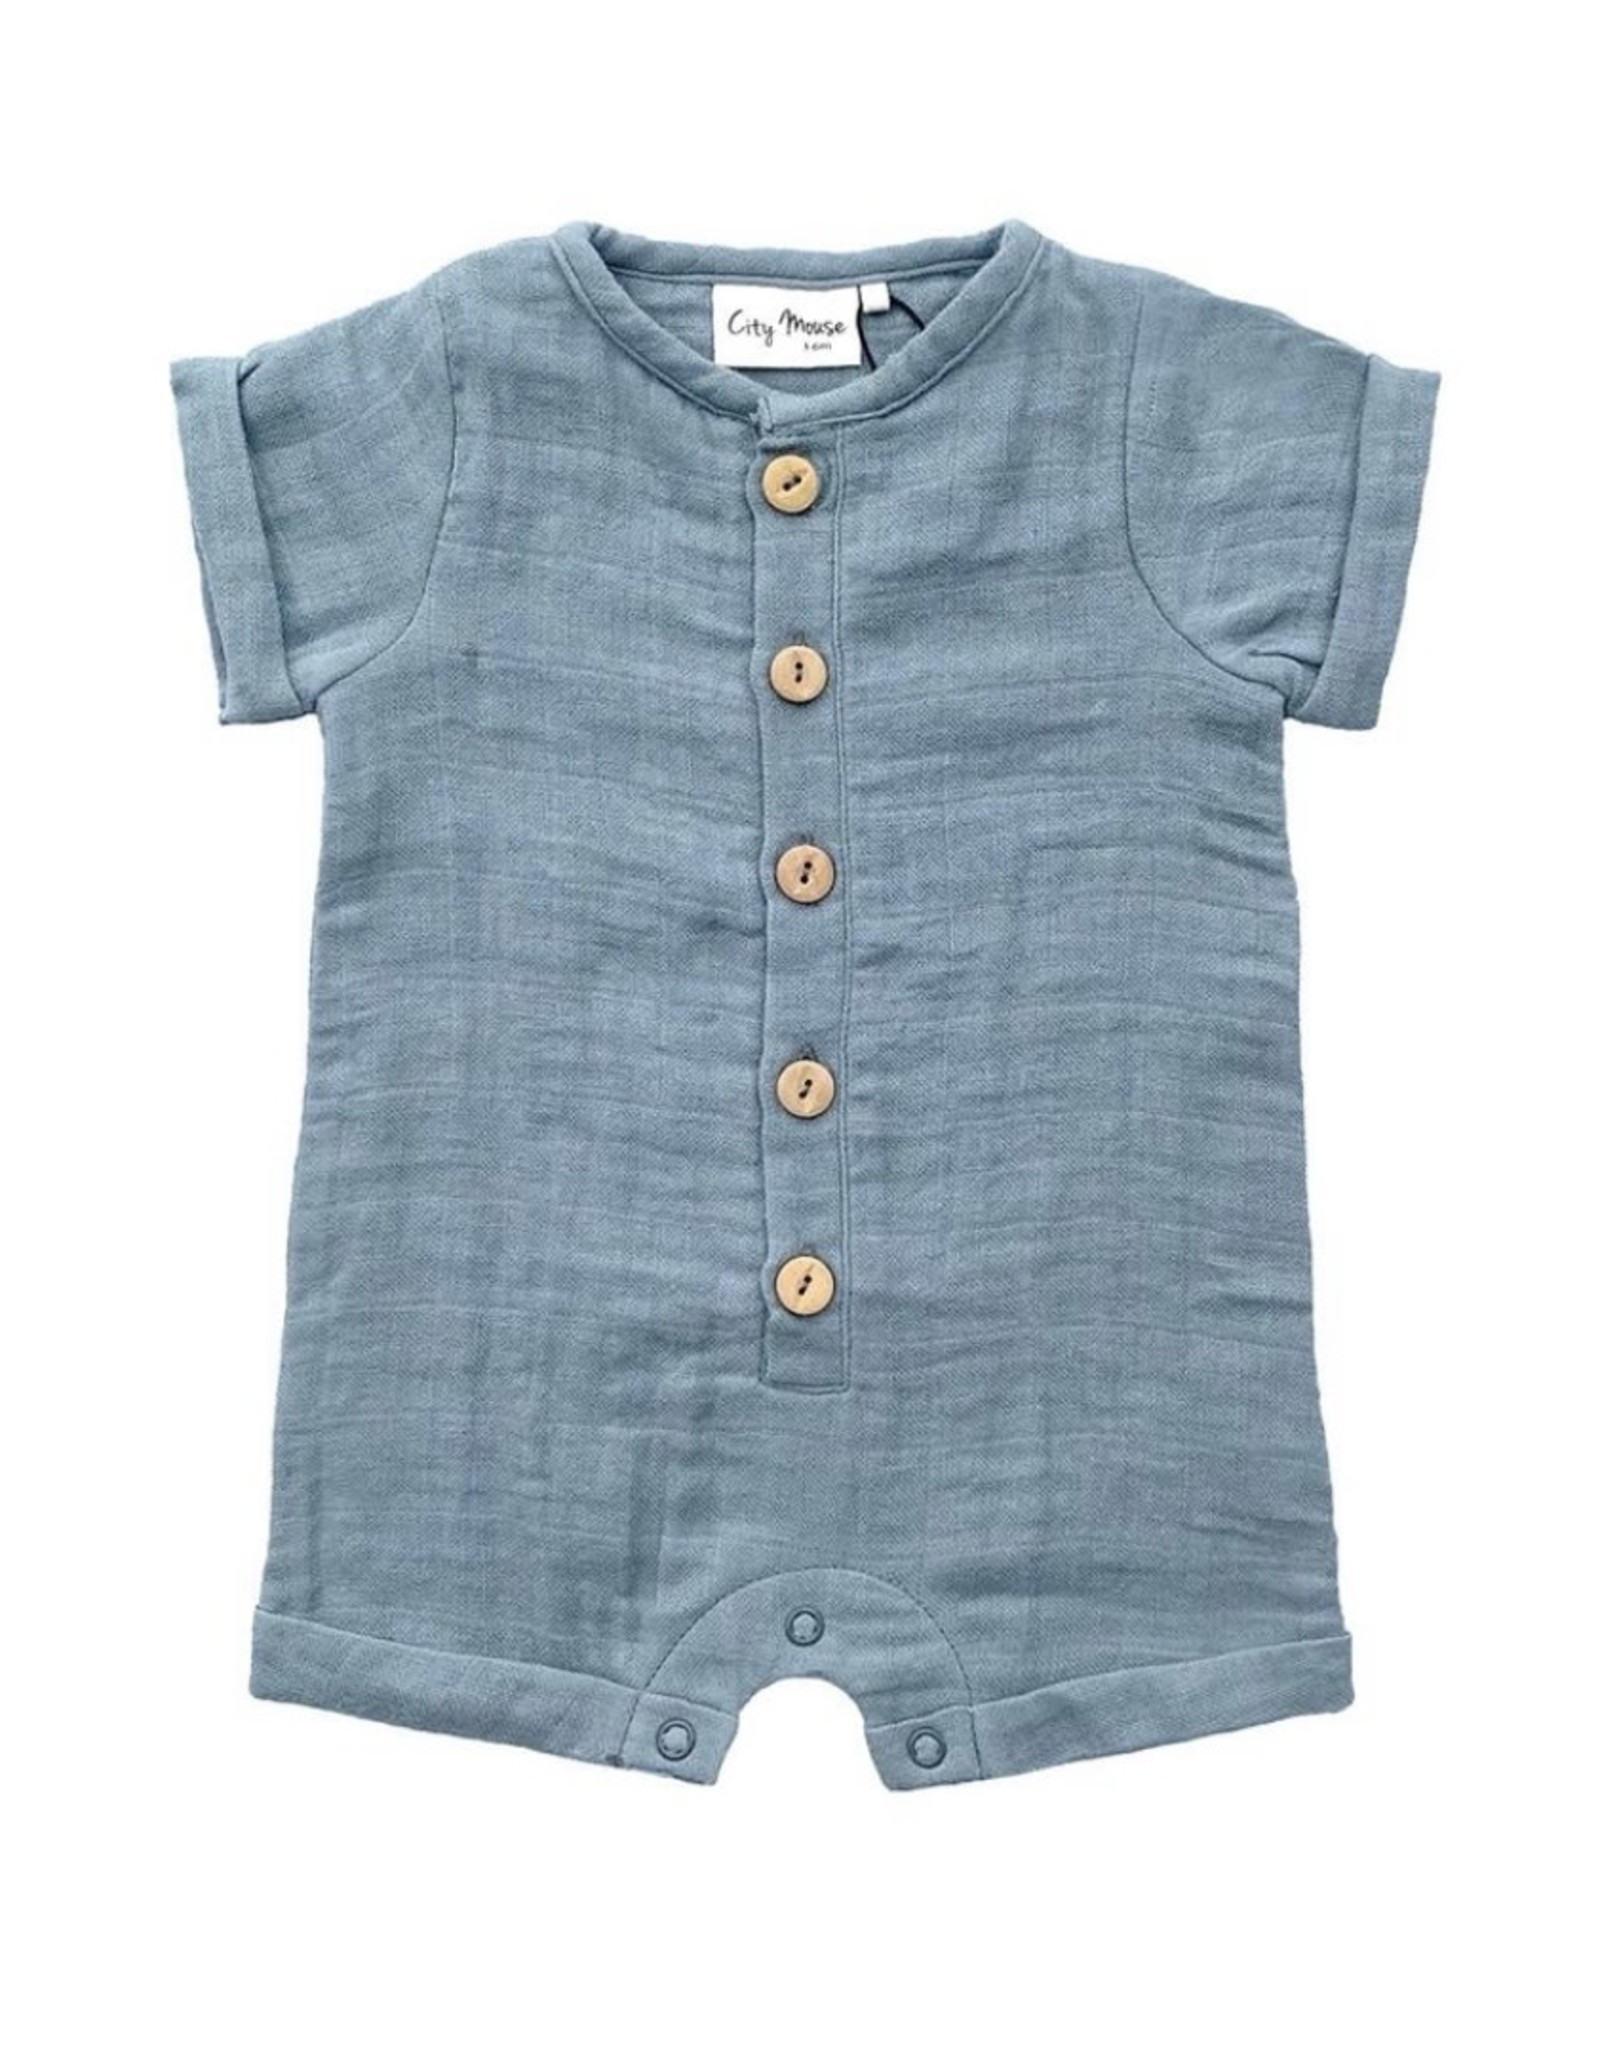 City Mouse City Mouse- Muted Teal Muslin Button Romper